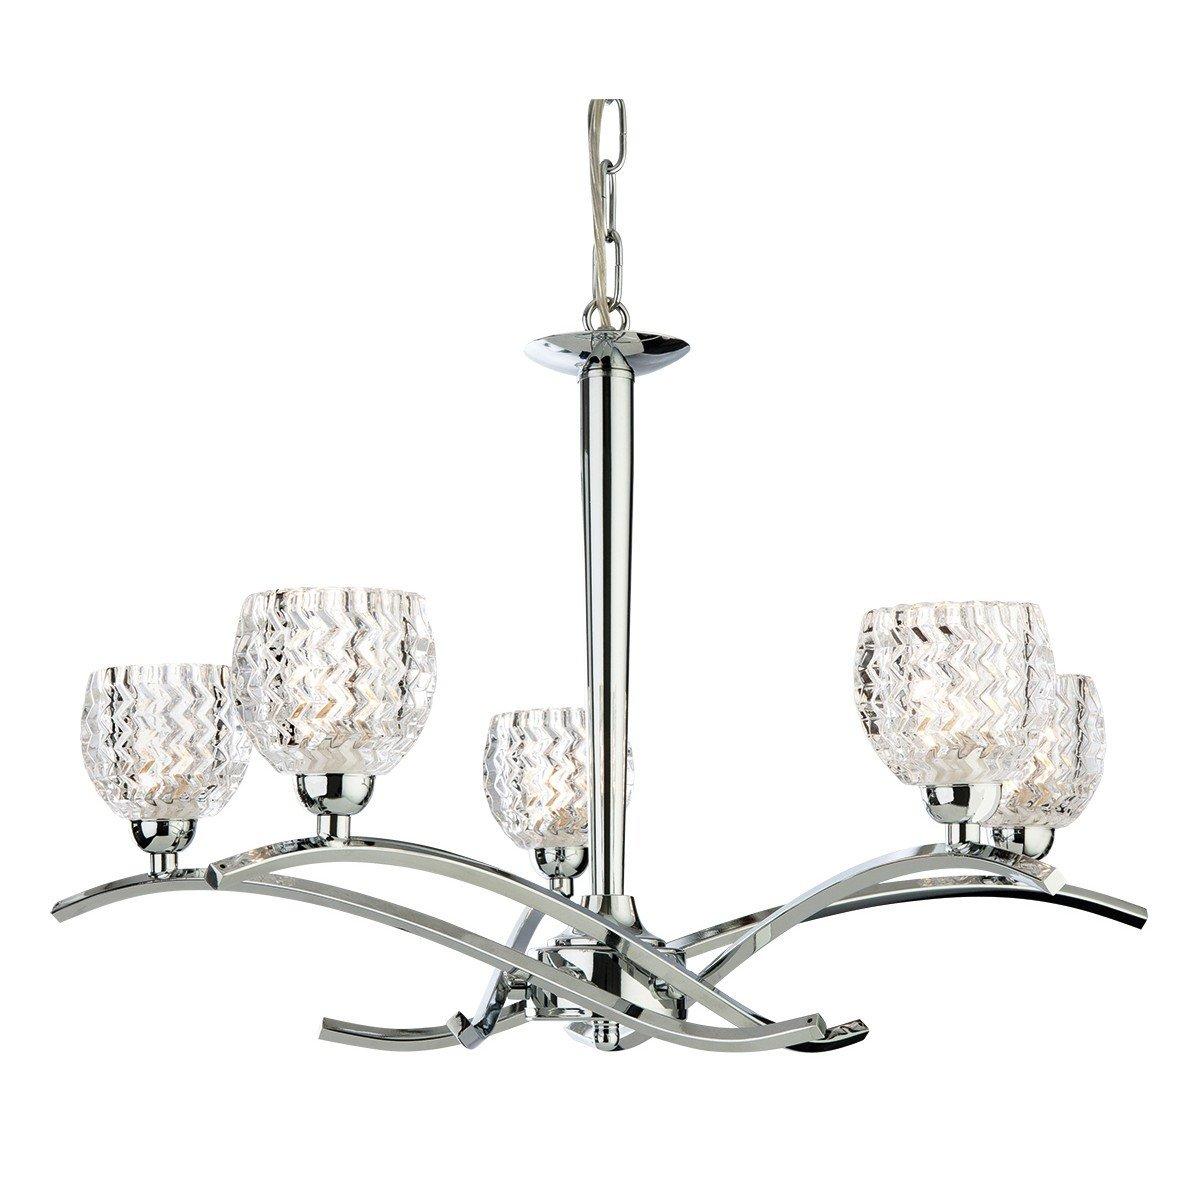 Maple 5 Light Chandelier Chrome Moulded Clear Glass G9